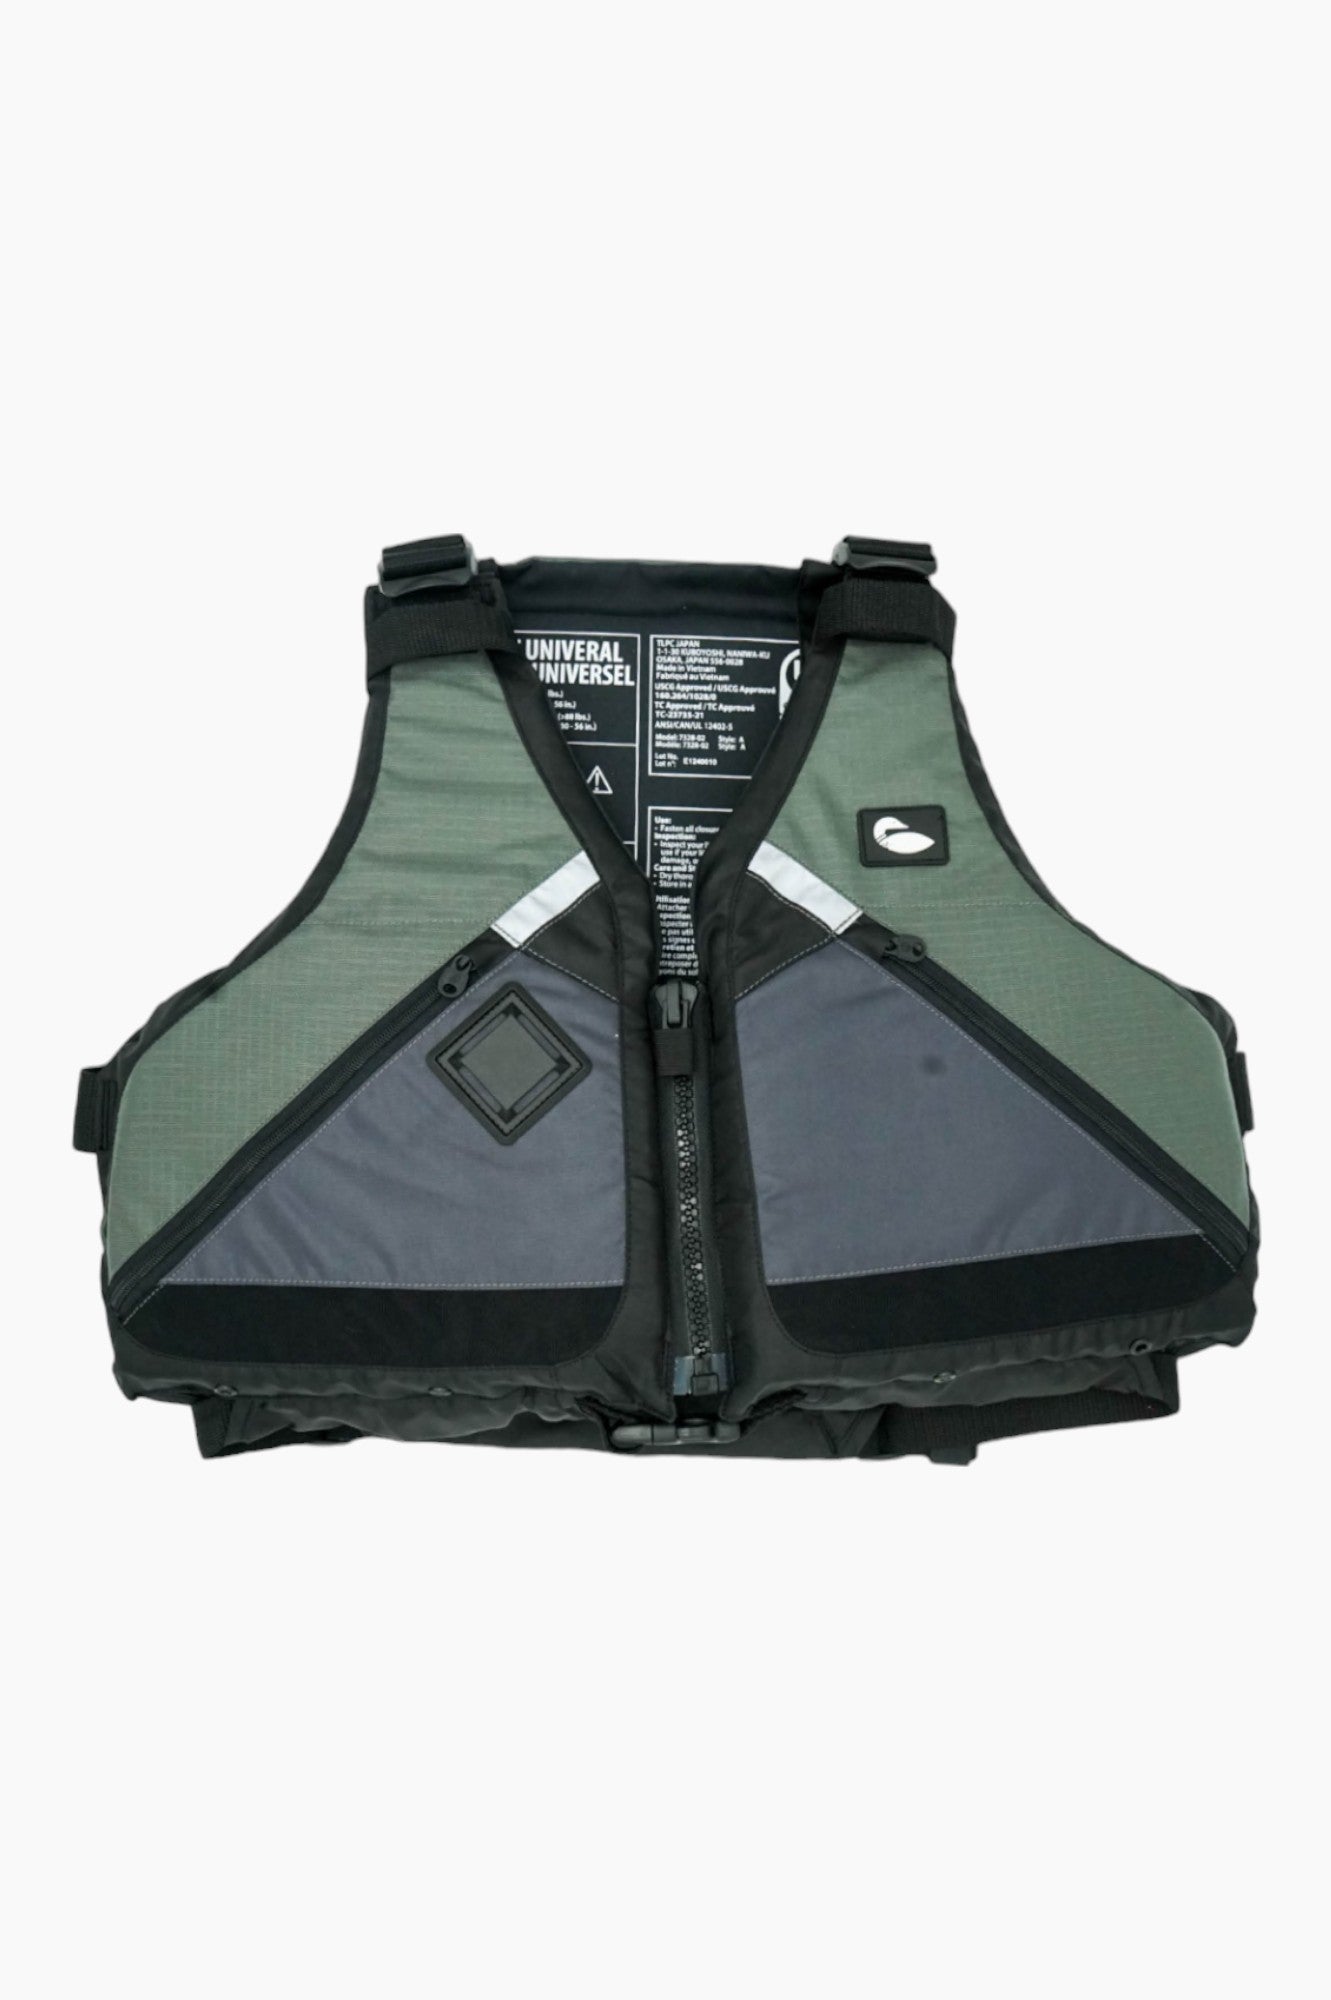 Green and grey life vest with black zippers.